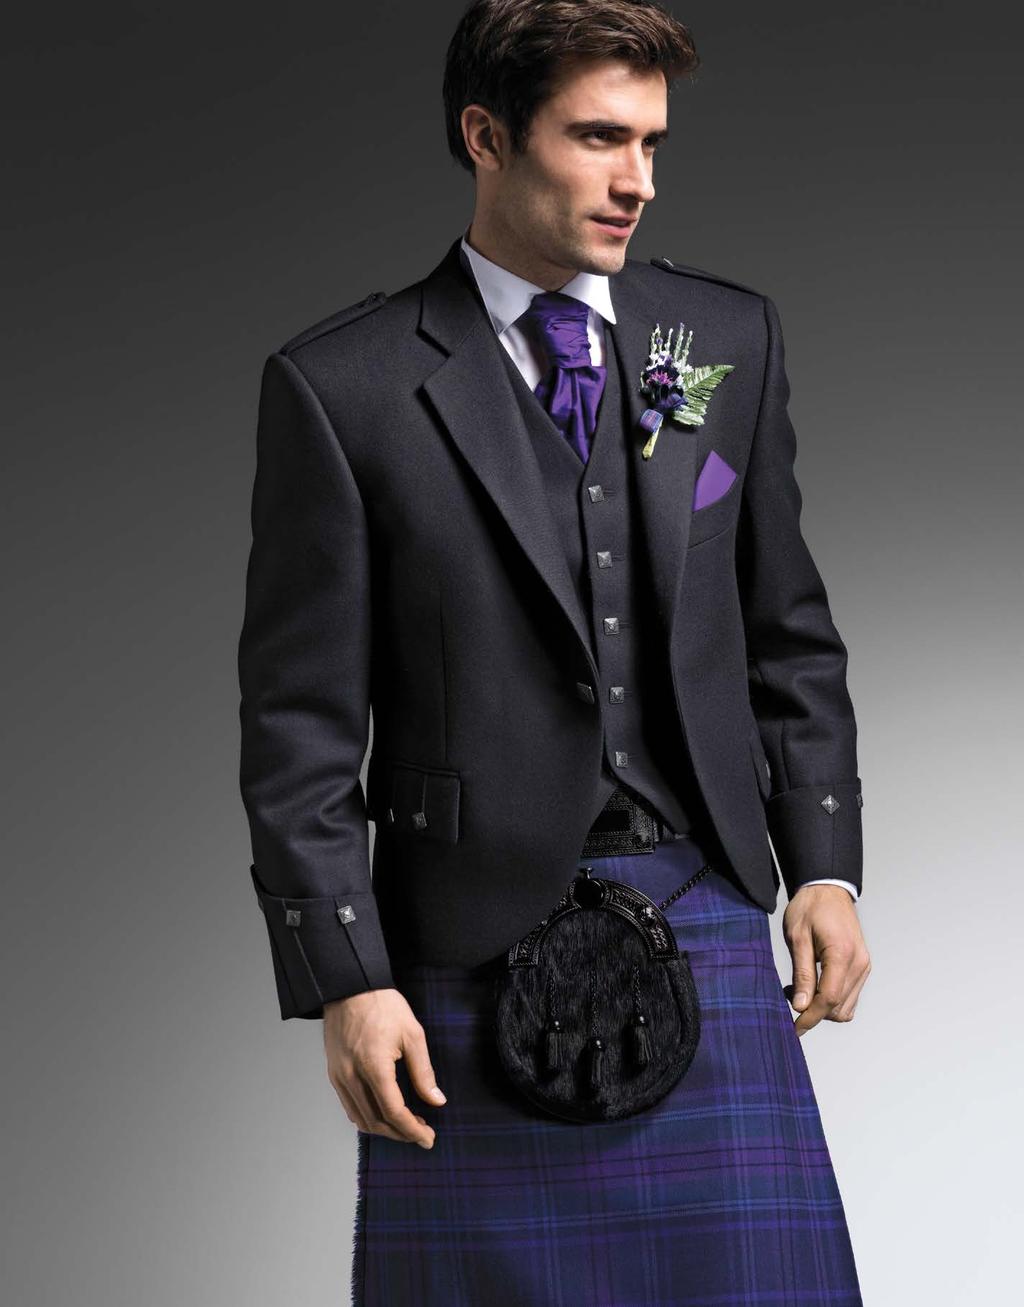 These timeless jackets have remained unchanged through the years and can be worn with many different tartans.